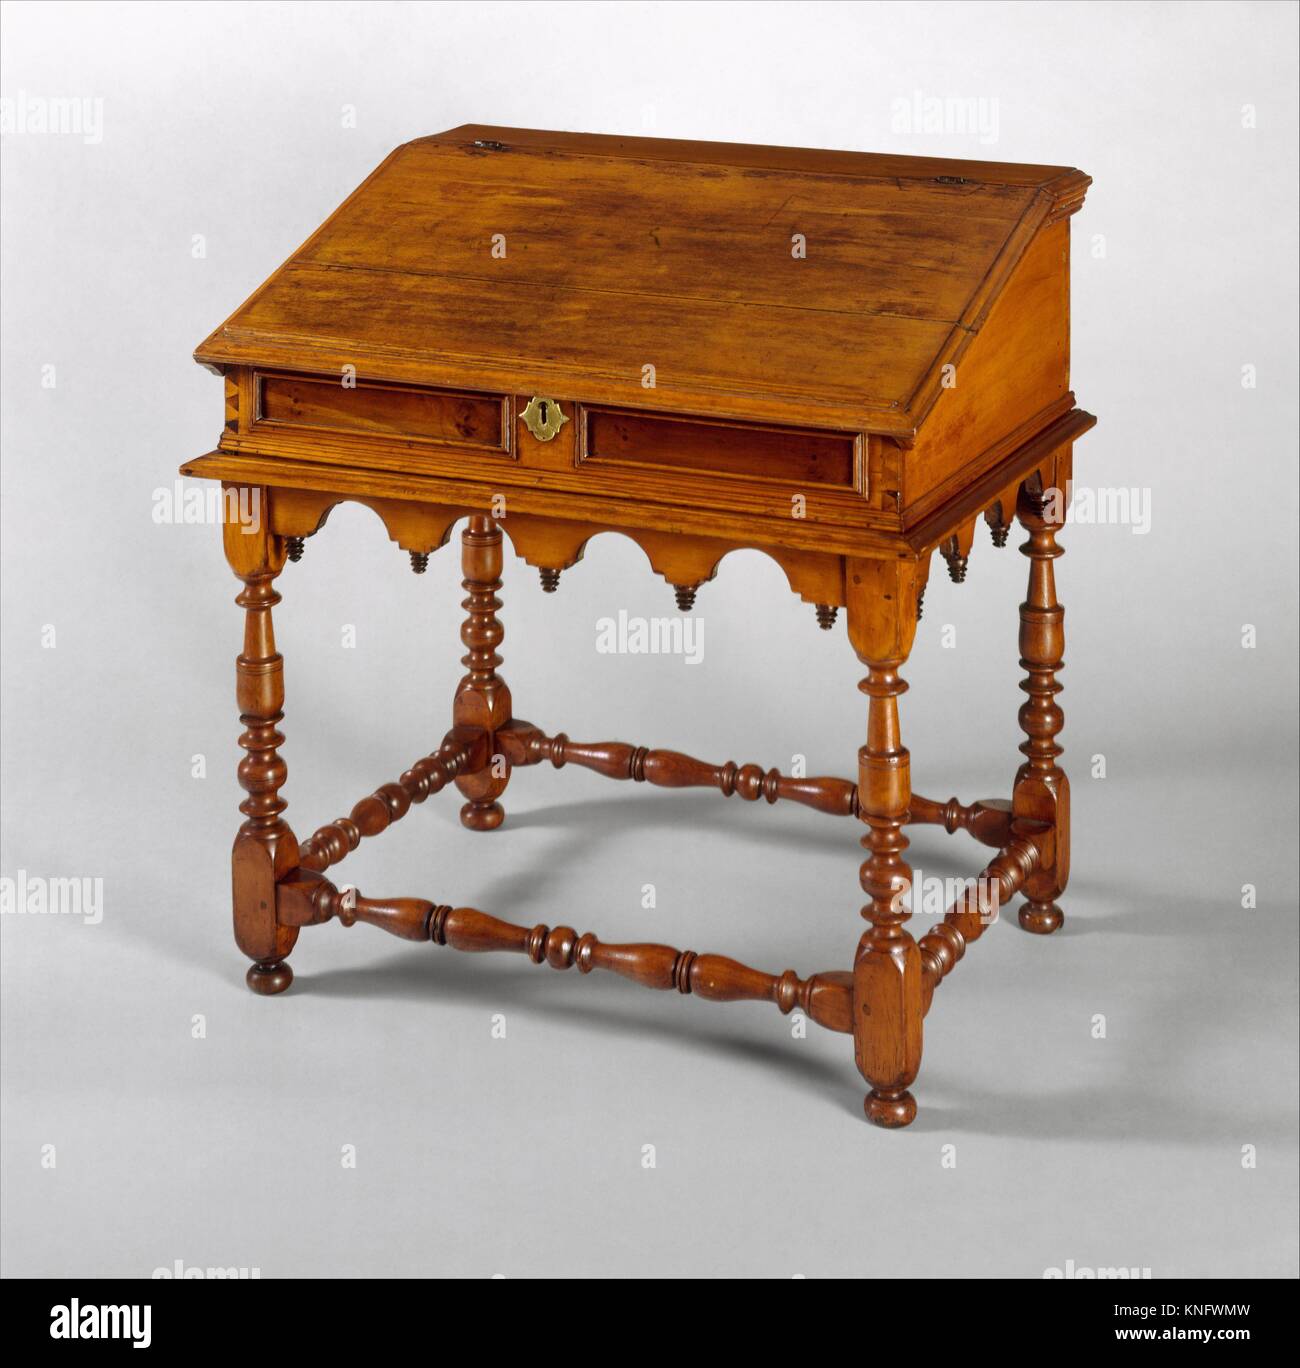 Desk-on-frame. Date: 1690-1720; Geography: Made in New York, New York, United States; Culture: American; Medium: Sweet gum, possibly mahogany veneer, Stock Photo